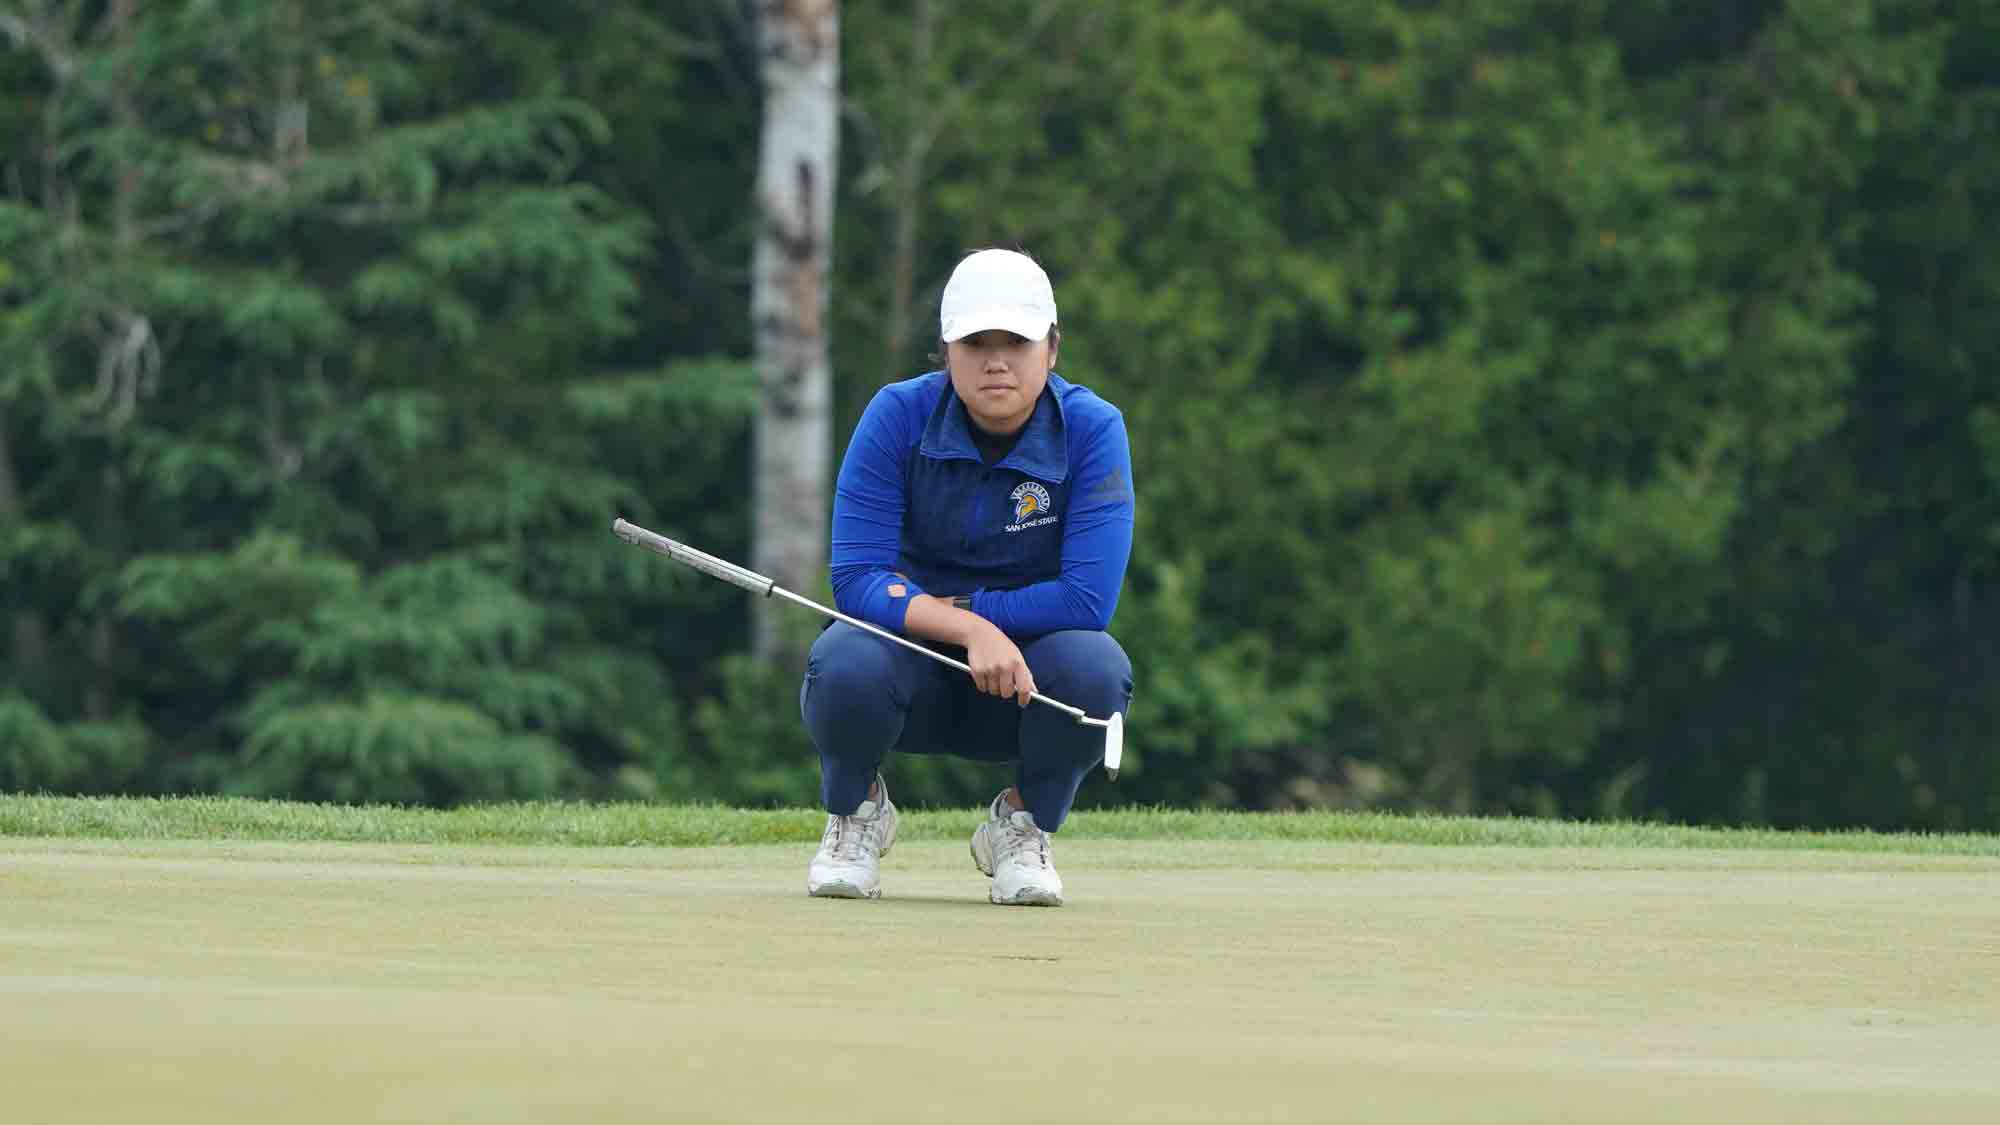 Natasha Andrea Oon during the final round of the Island Resort Championship